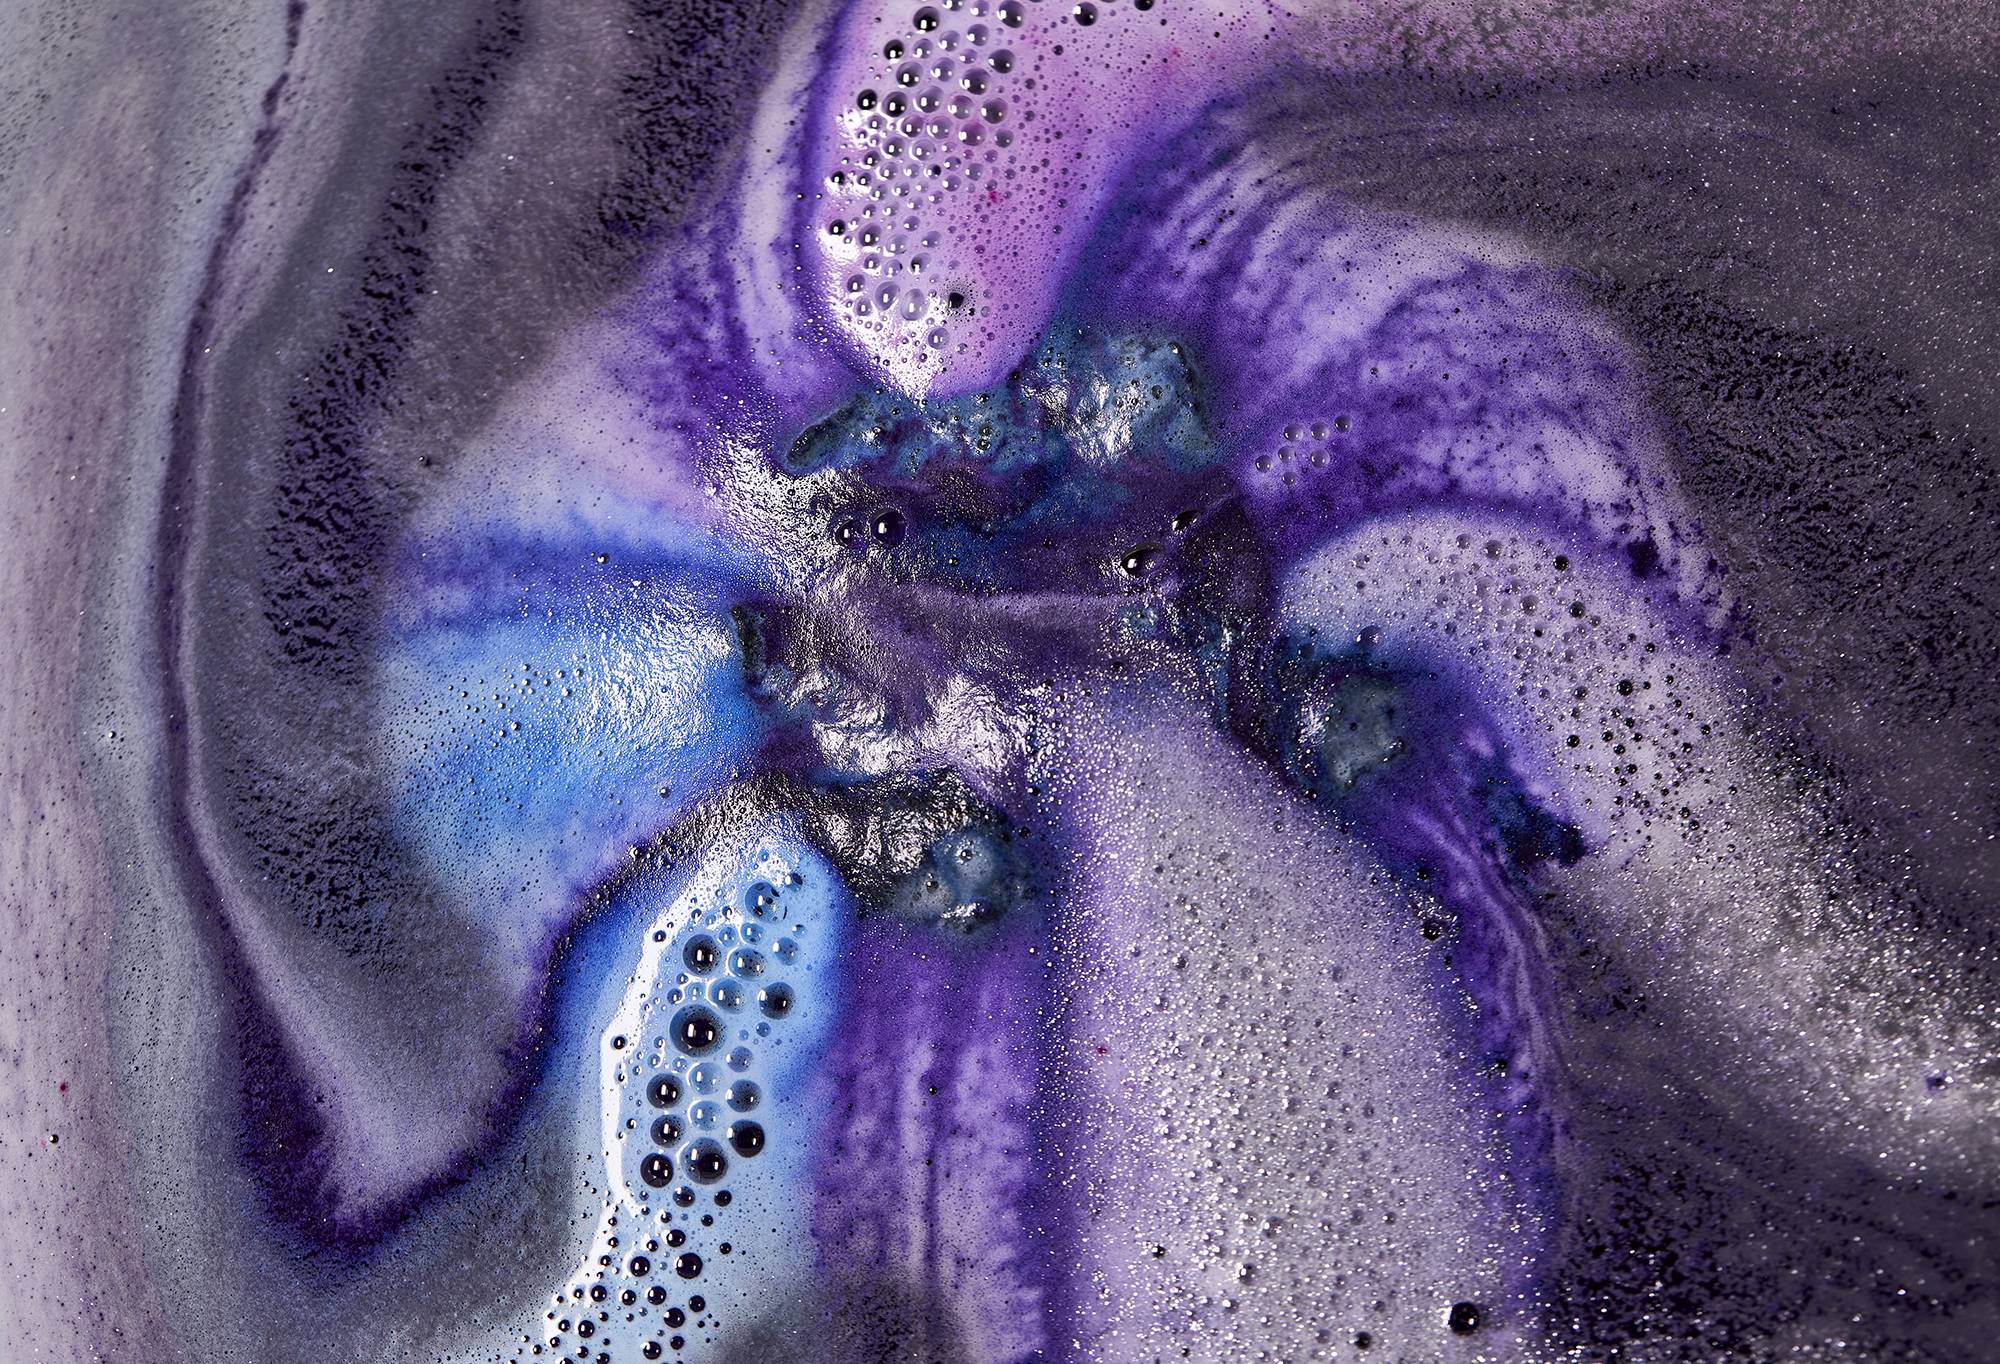 The bath bomb fizzes in the water, releasing dark blue, purple and indigo foam trails across the surface.